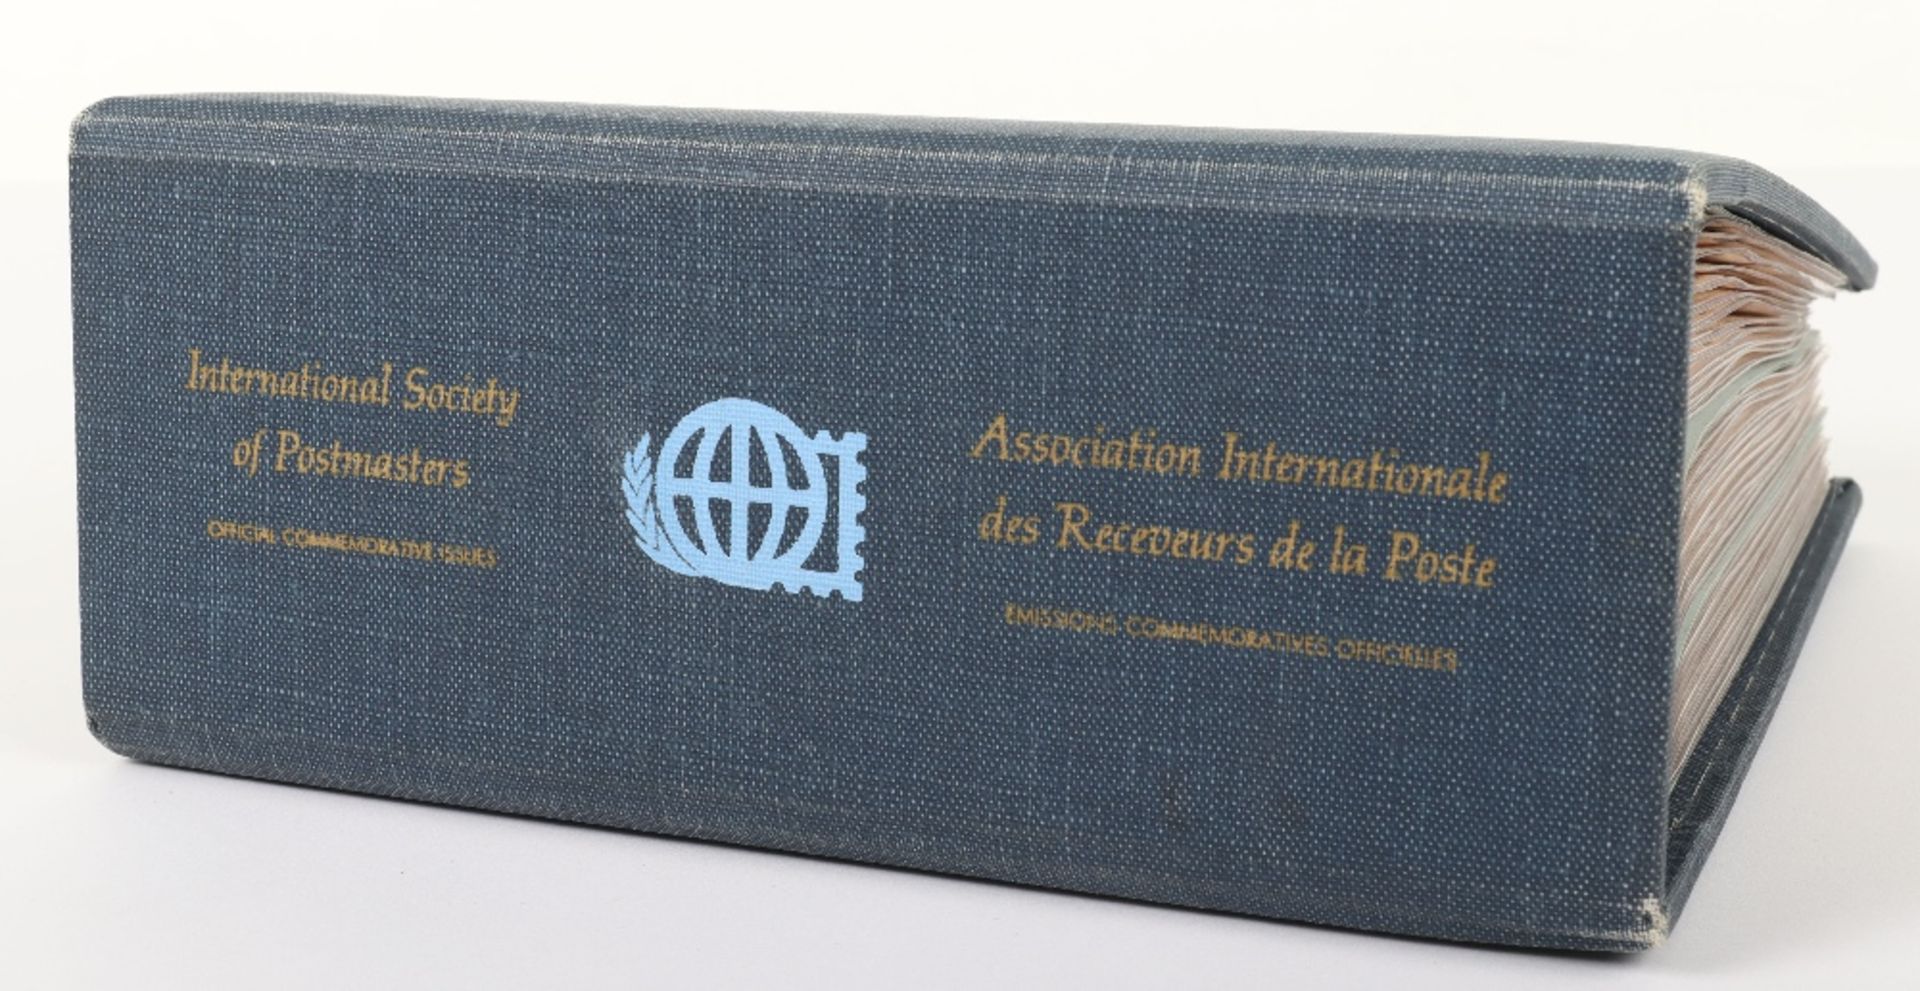 International Society of Postmasters, Official Commemorative Issue album